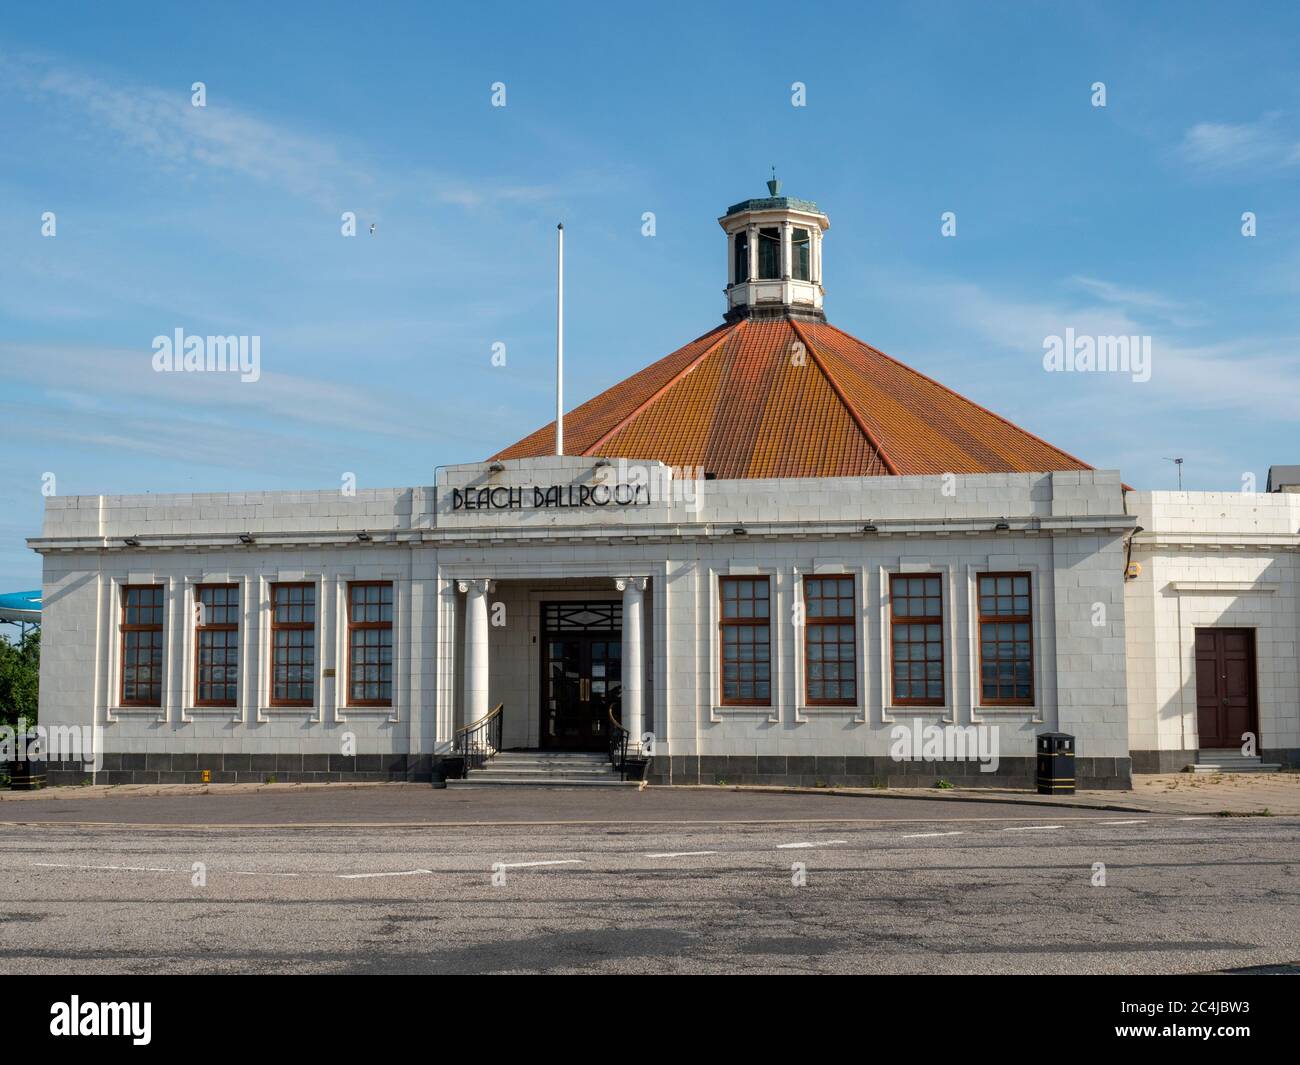 The Beach Ballroom, an art deco building on the sea front of Aberdeen, Scotland.  Built in 1926, it is a Category B listed building. Stock Photo